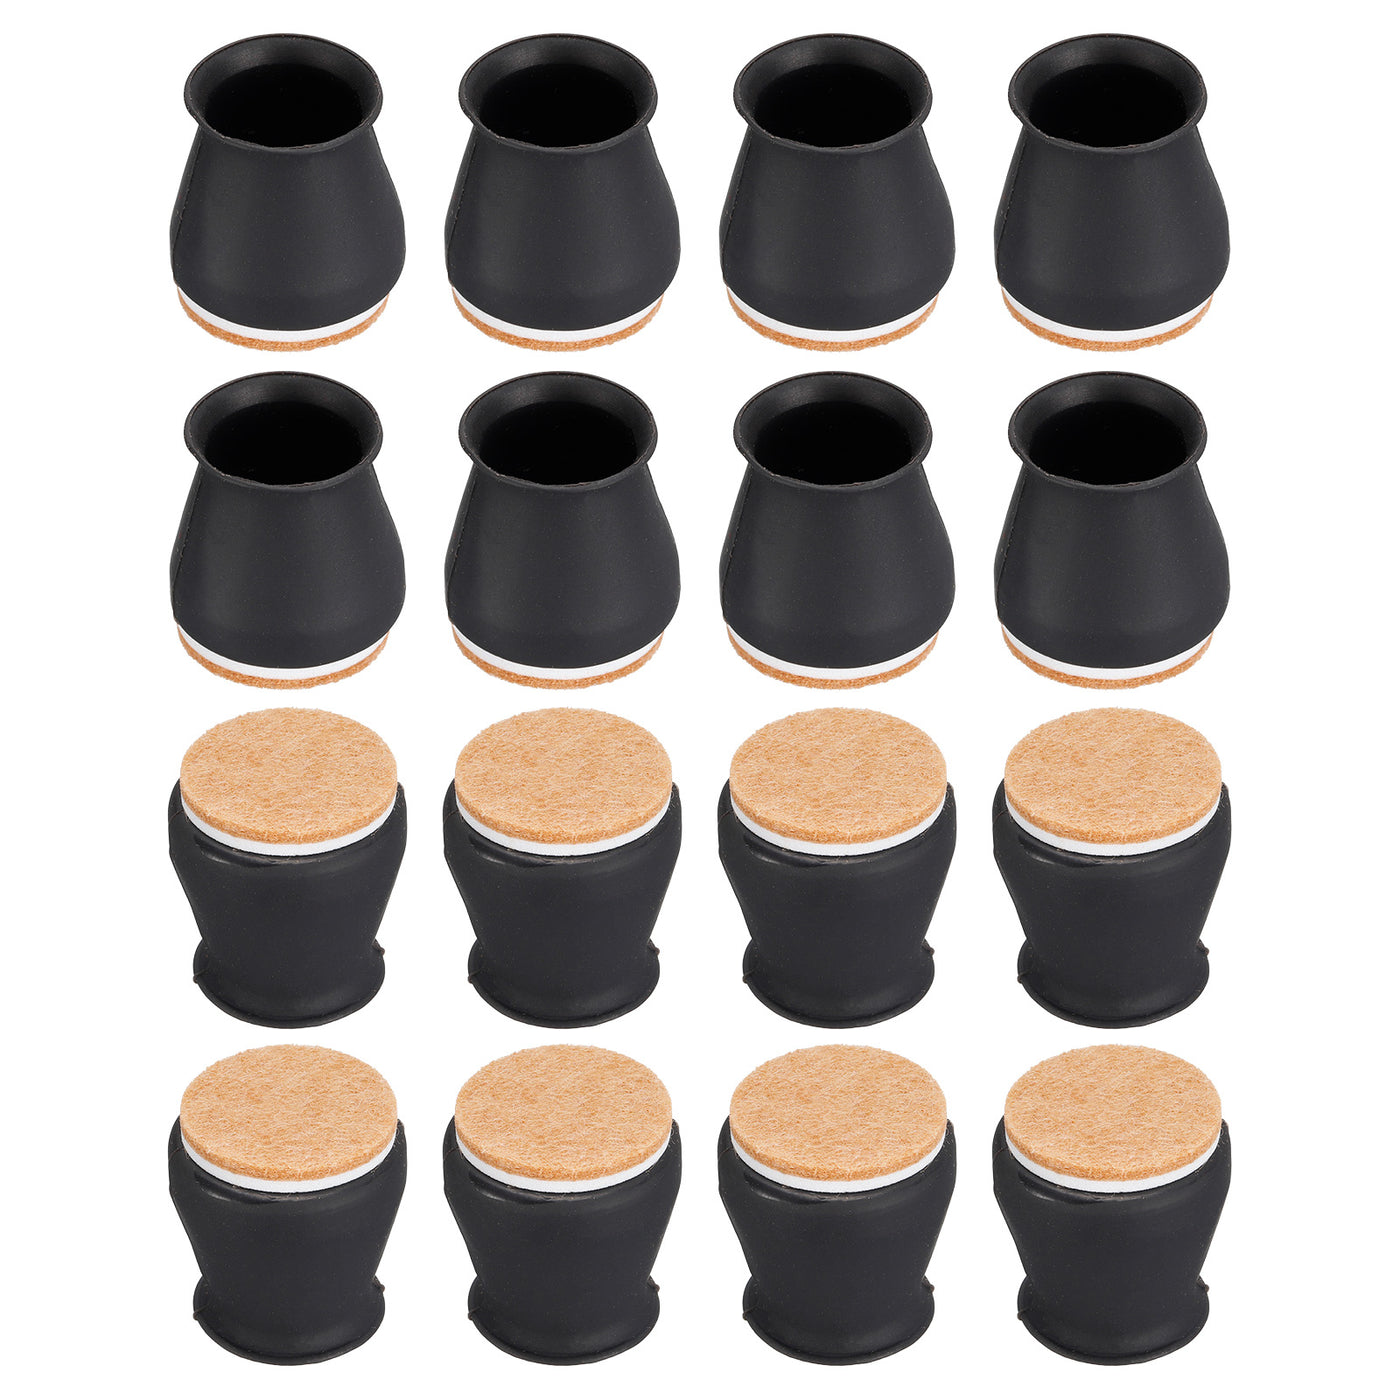 uxcell Uxcell Chair Leg Floor Protectors, 16Pcs 23mm(0.91") Silicone & Felt Chair Leg Cover Caps for Hardwood Floors (Black)